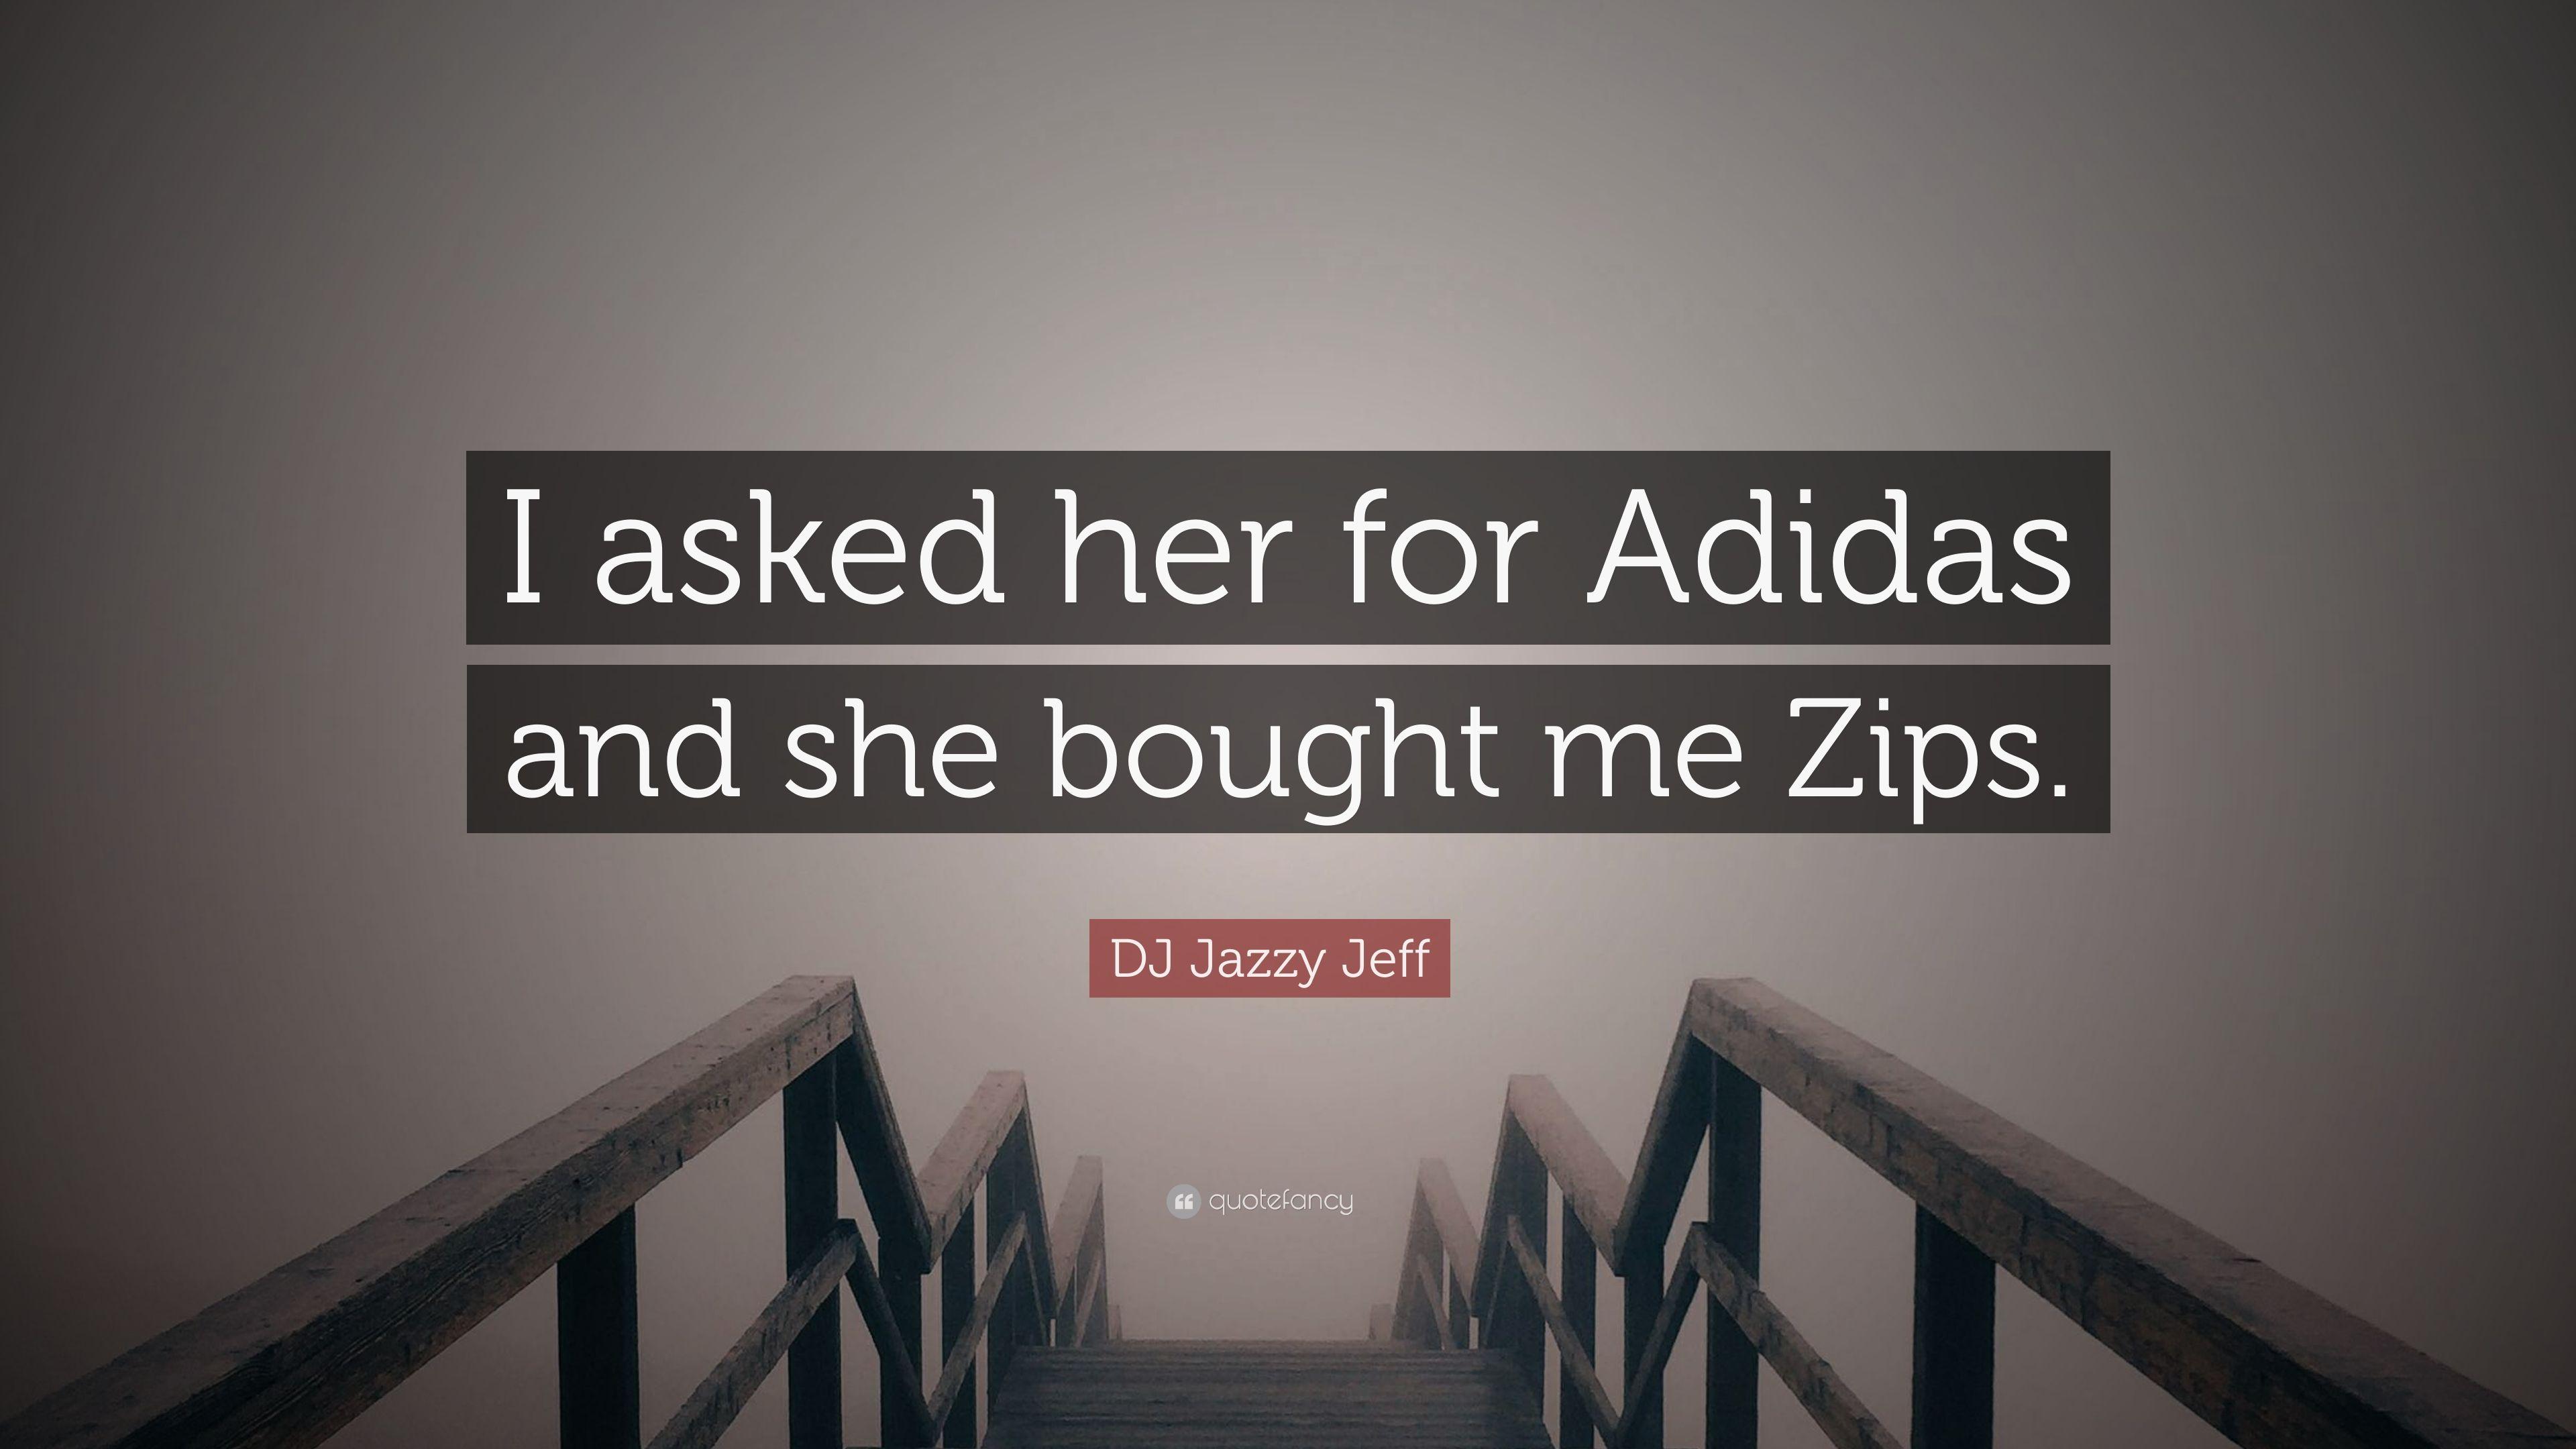 DJ Jazzy Jeff Quote: “I asked her for Adidas and she bought me Zips